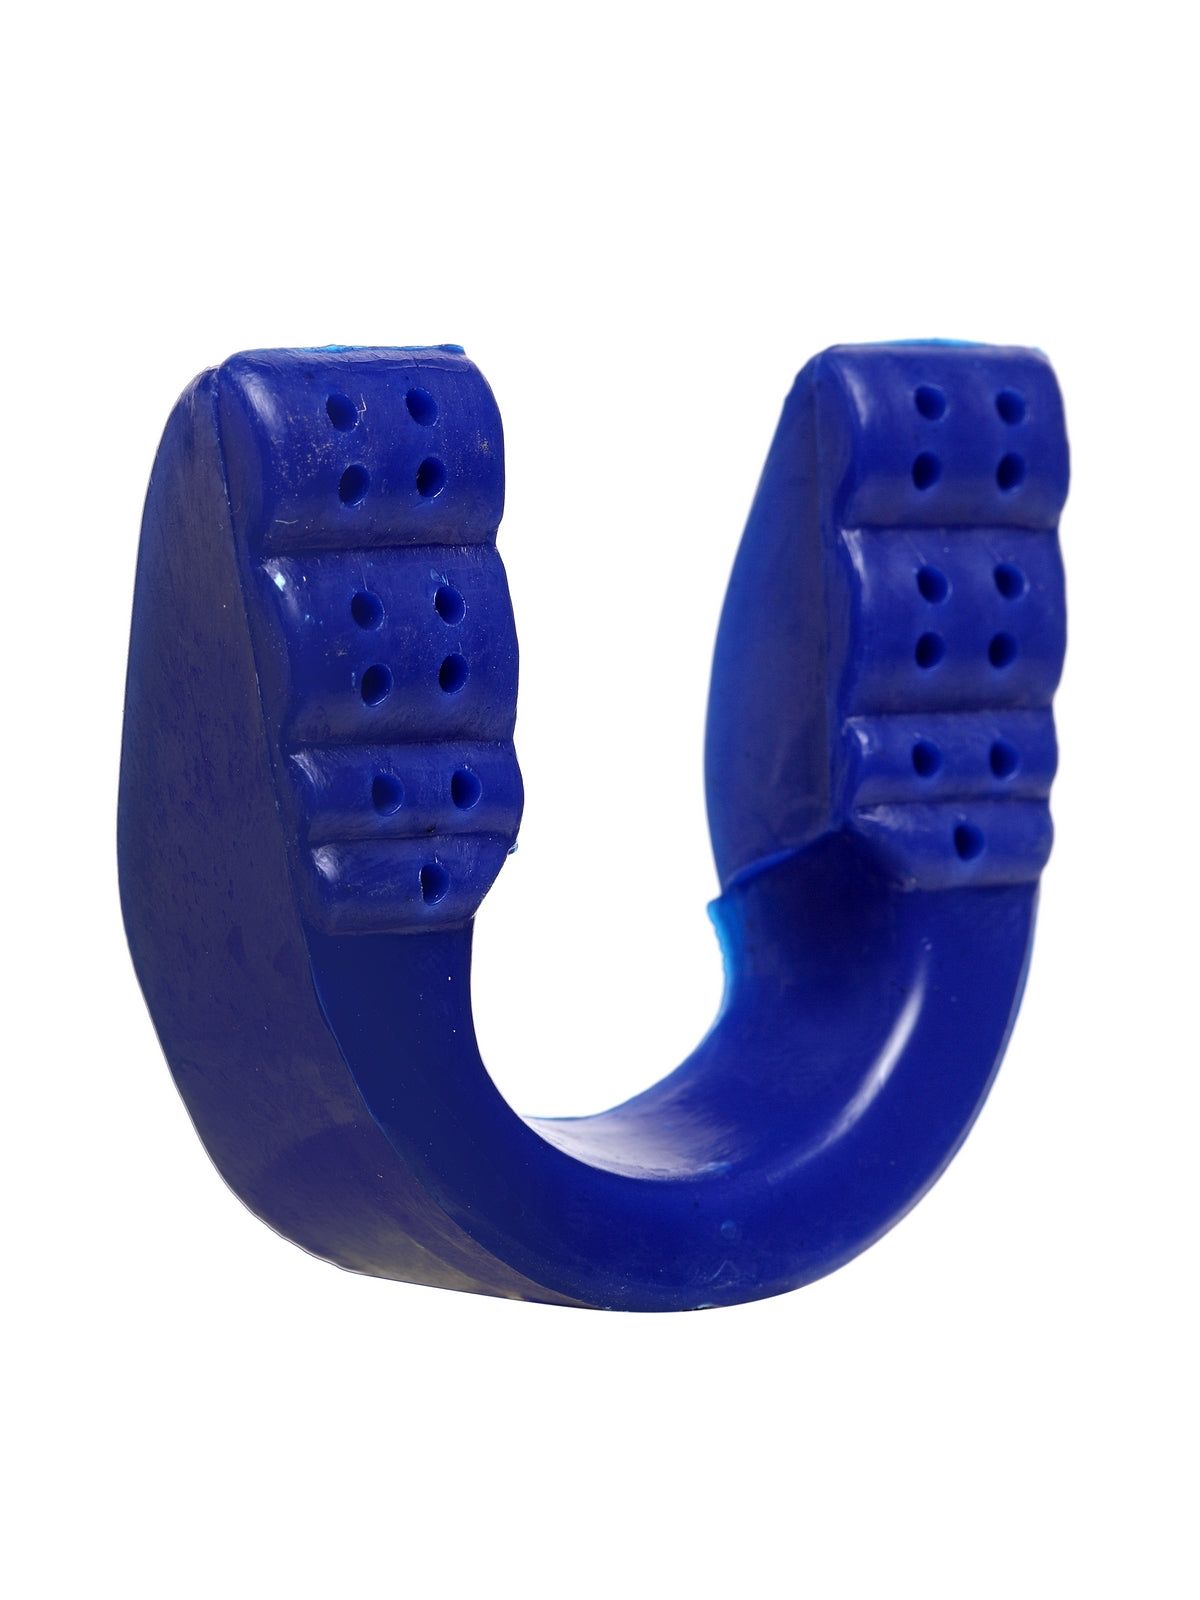 Invincible Mint Flavor Mouth Guard with Teeth Impression